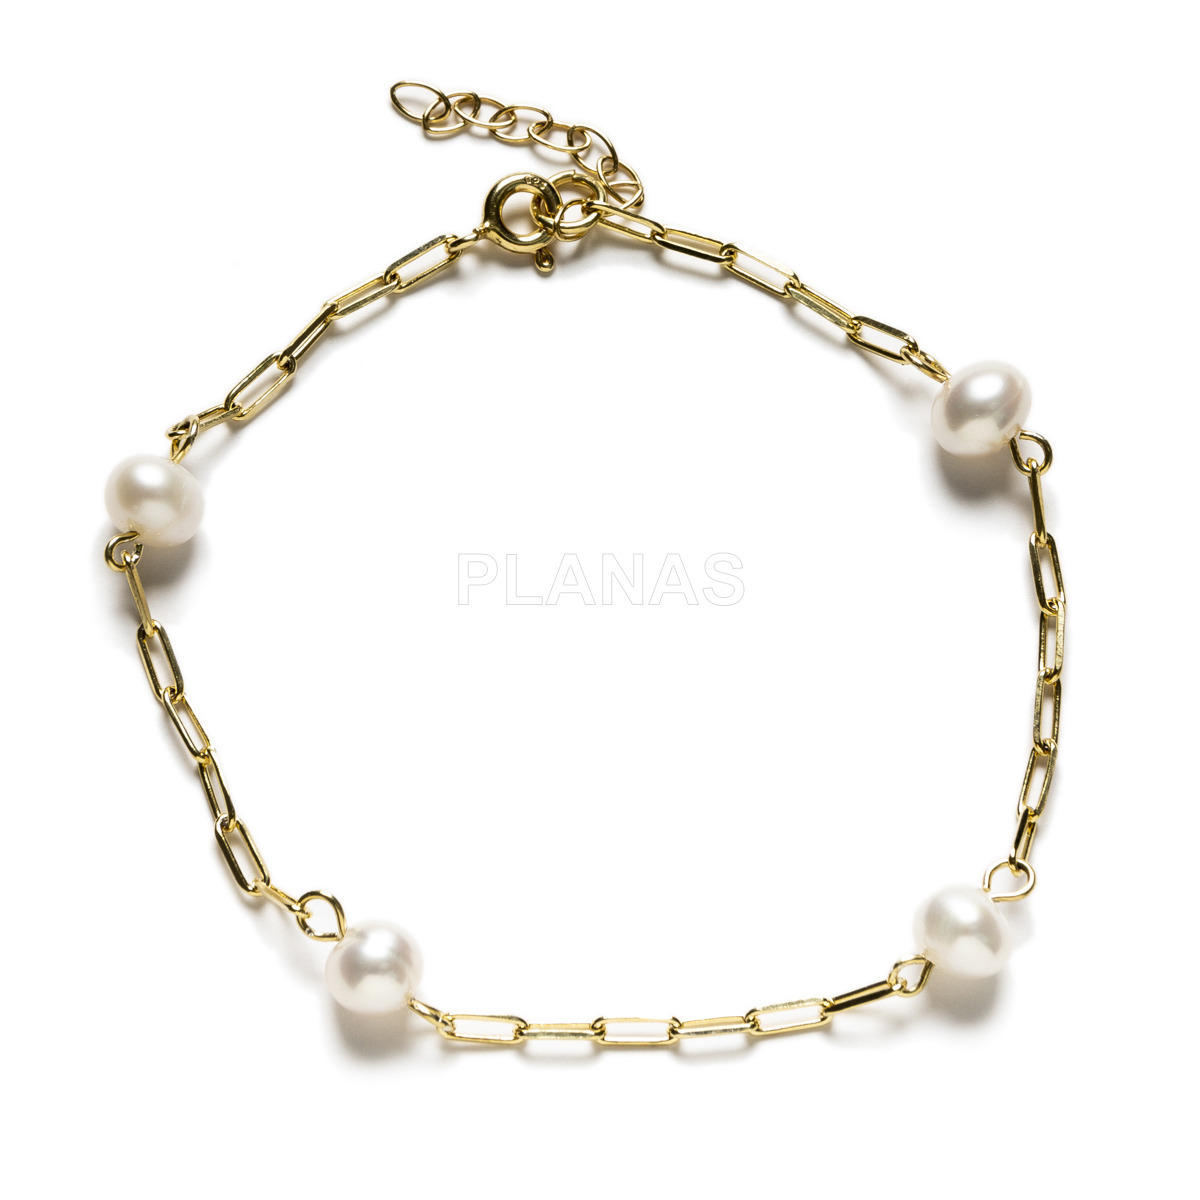 Set of necklace, bracelet and earrings in gold plated sterling silver with cultured pearl.